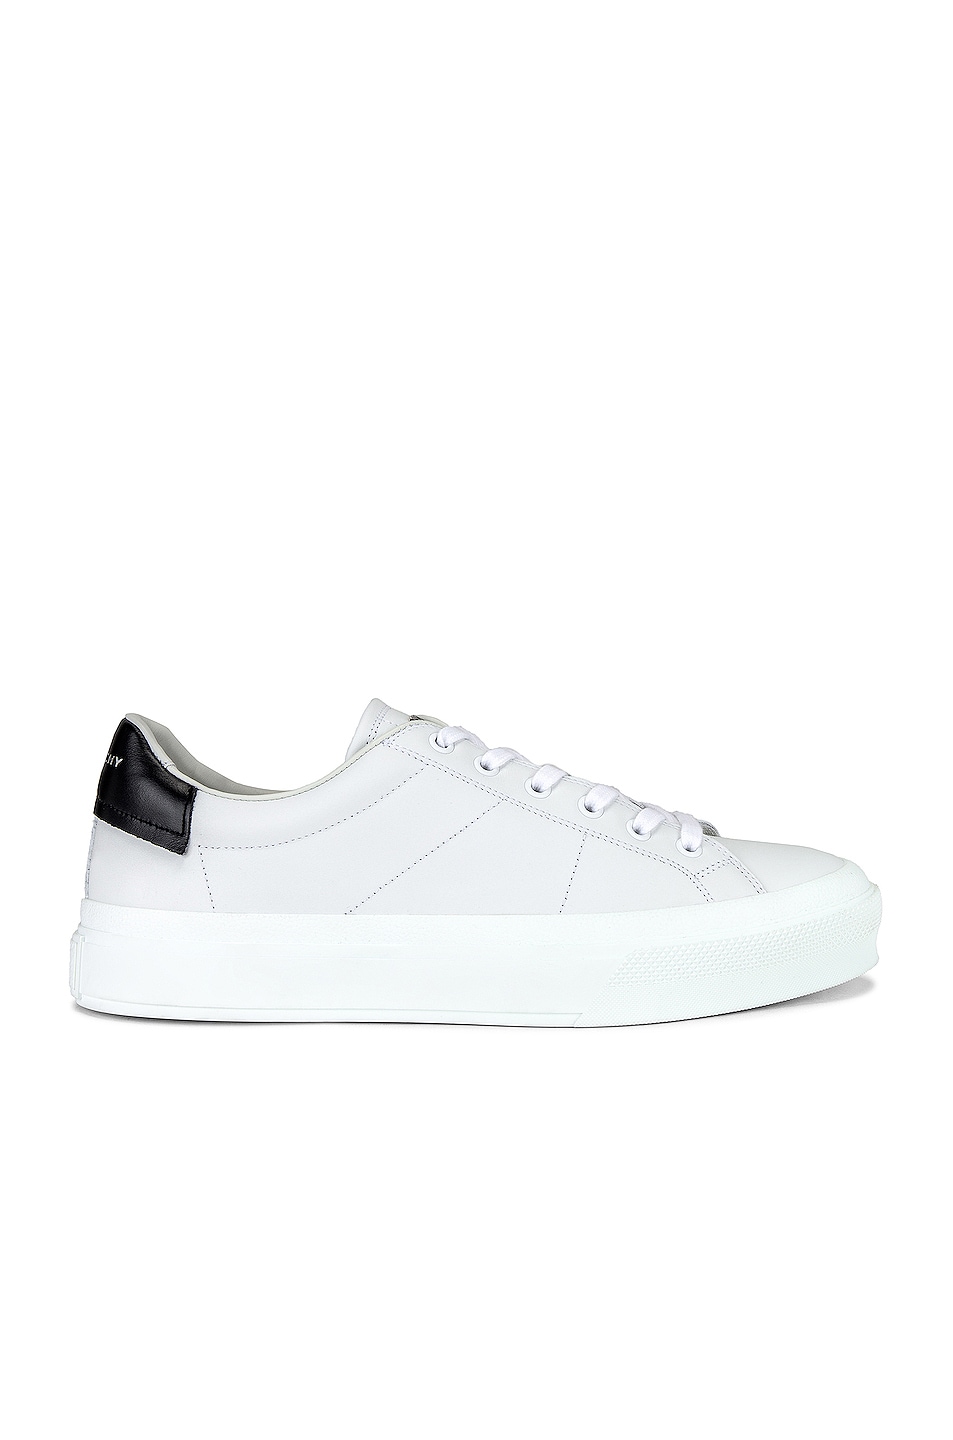 Image 1 of Givenchy City Court Sneaker in White & Black